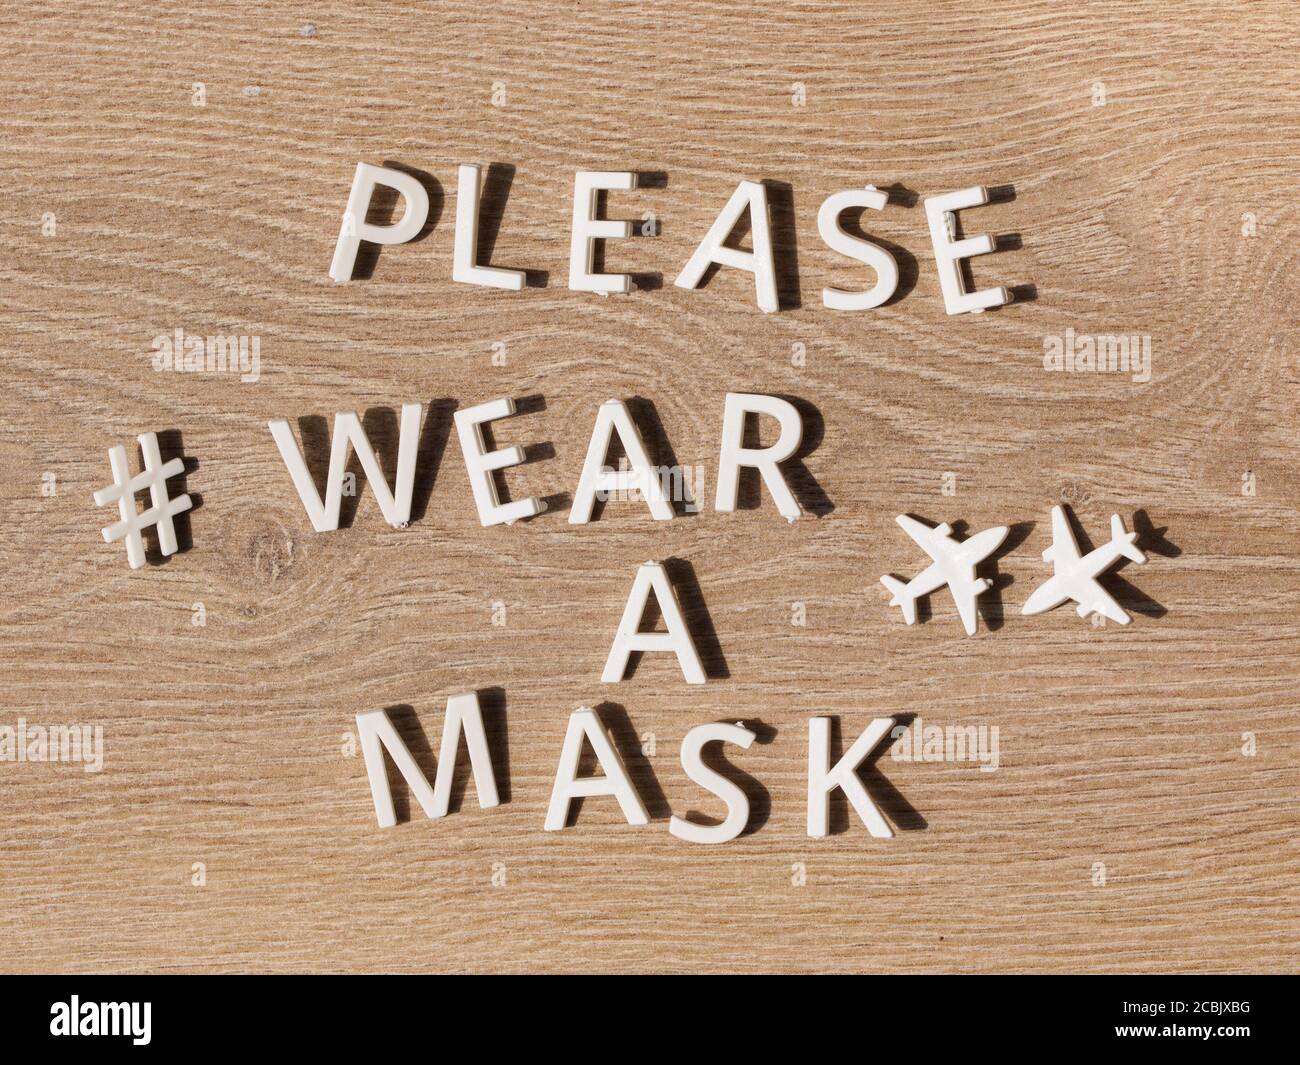 hashtag wear a mask. preventive health care notice sign with text PLEASE WEAR A MASK at entrance for coronavirus prevention. Compulsory measure in air Stock Photo